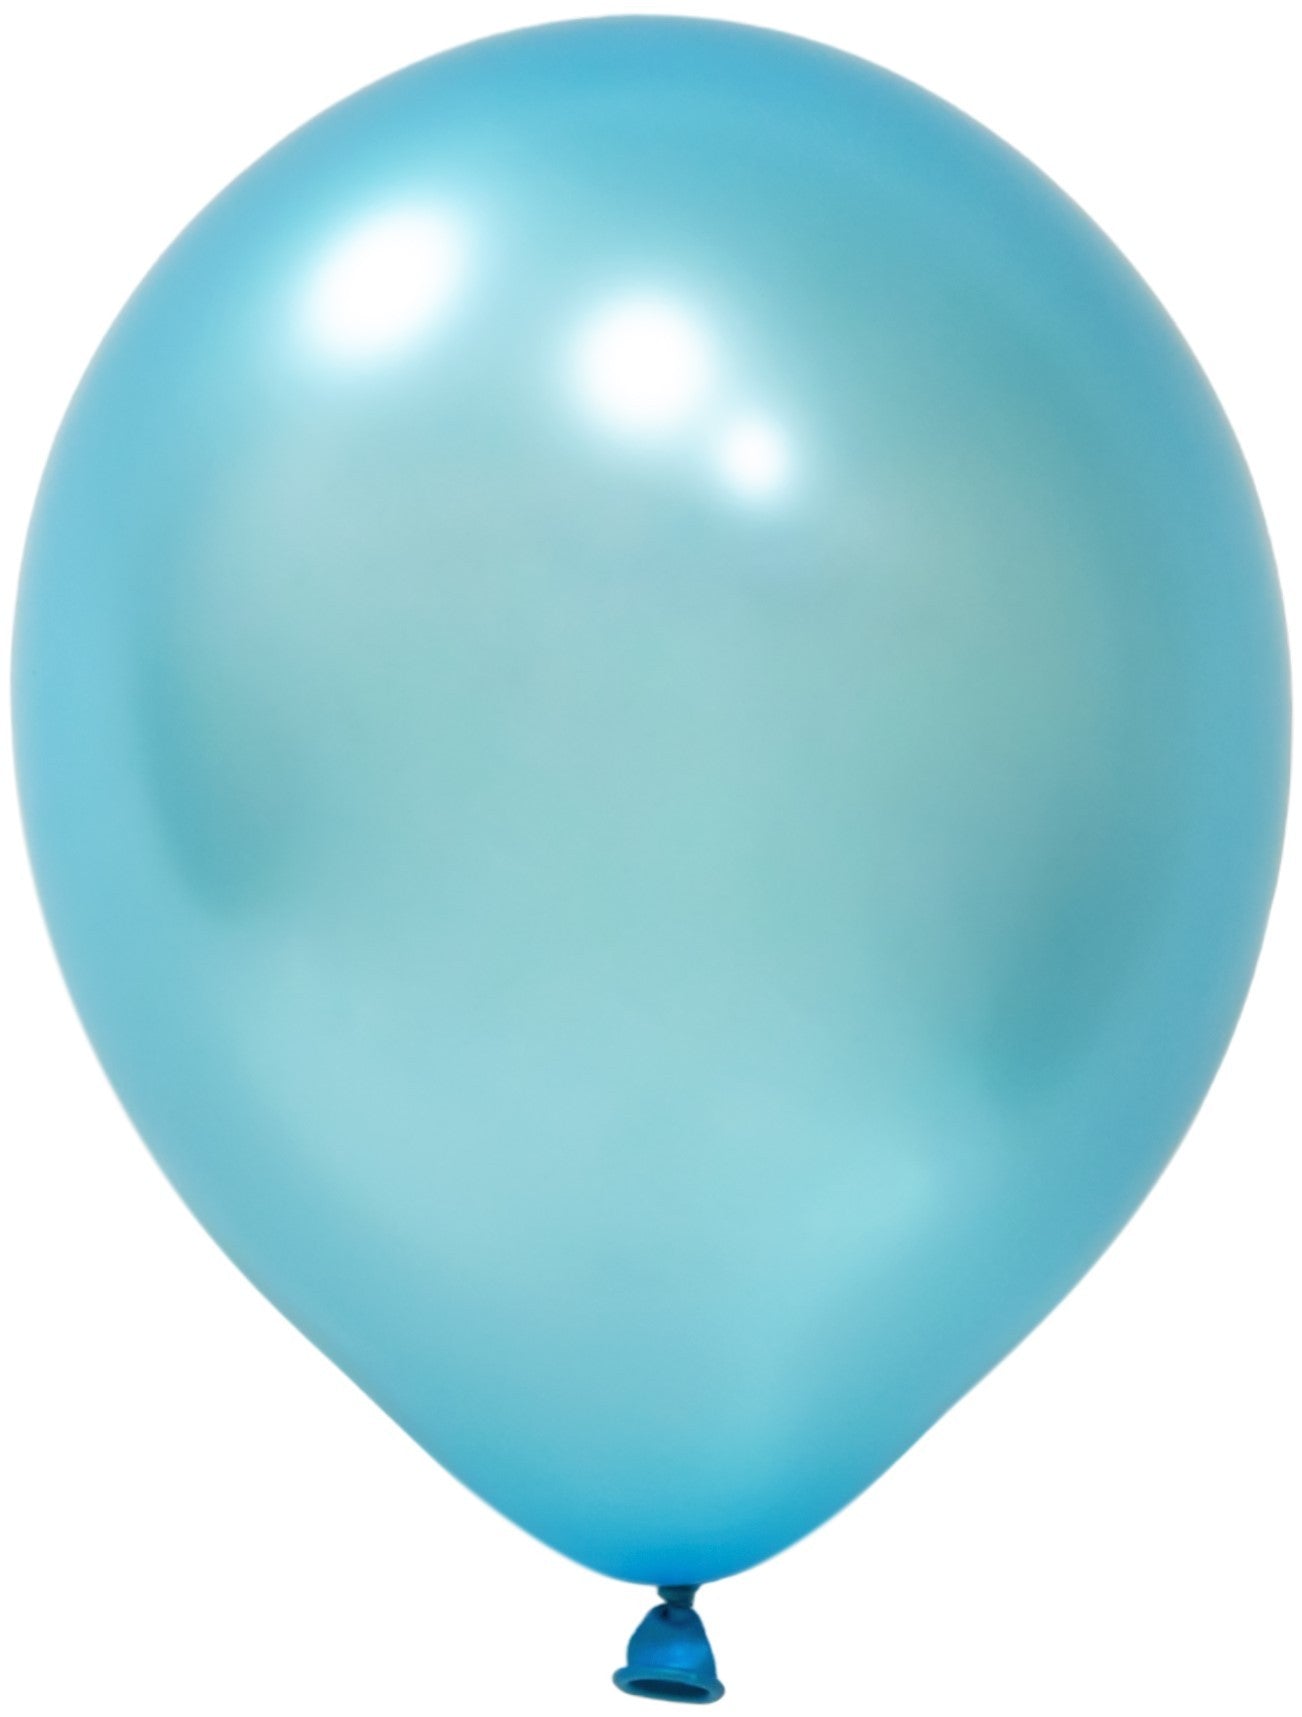 View Light Blue Metallic Latex Balloon 10inch Pack of 100 information